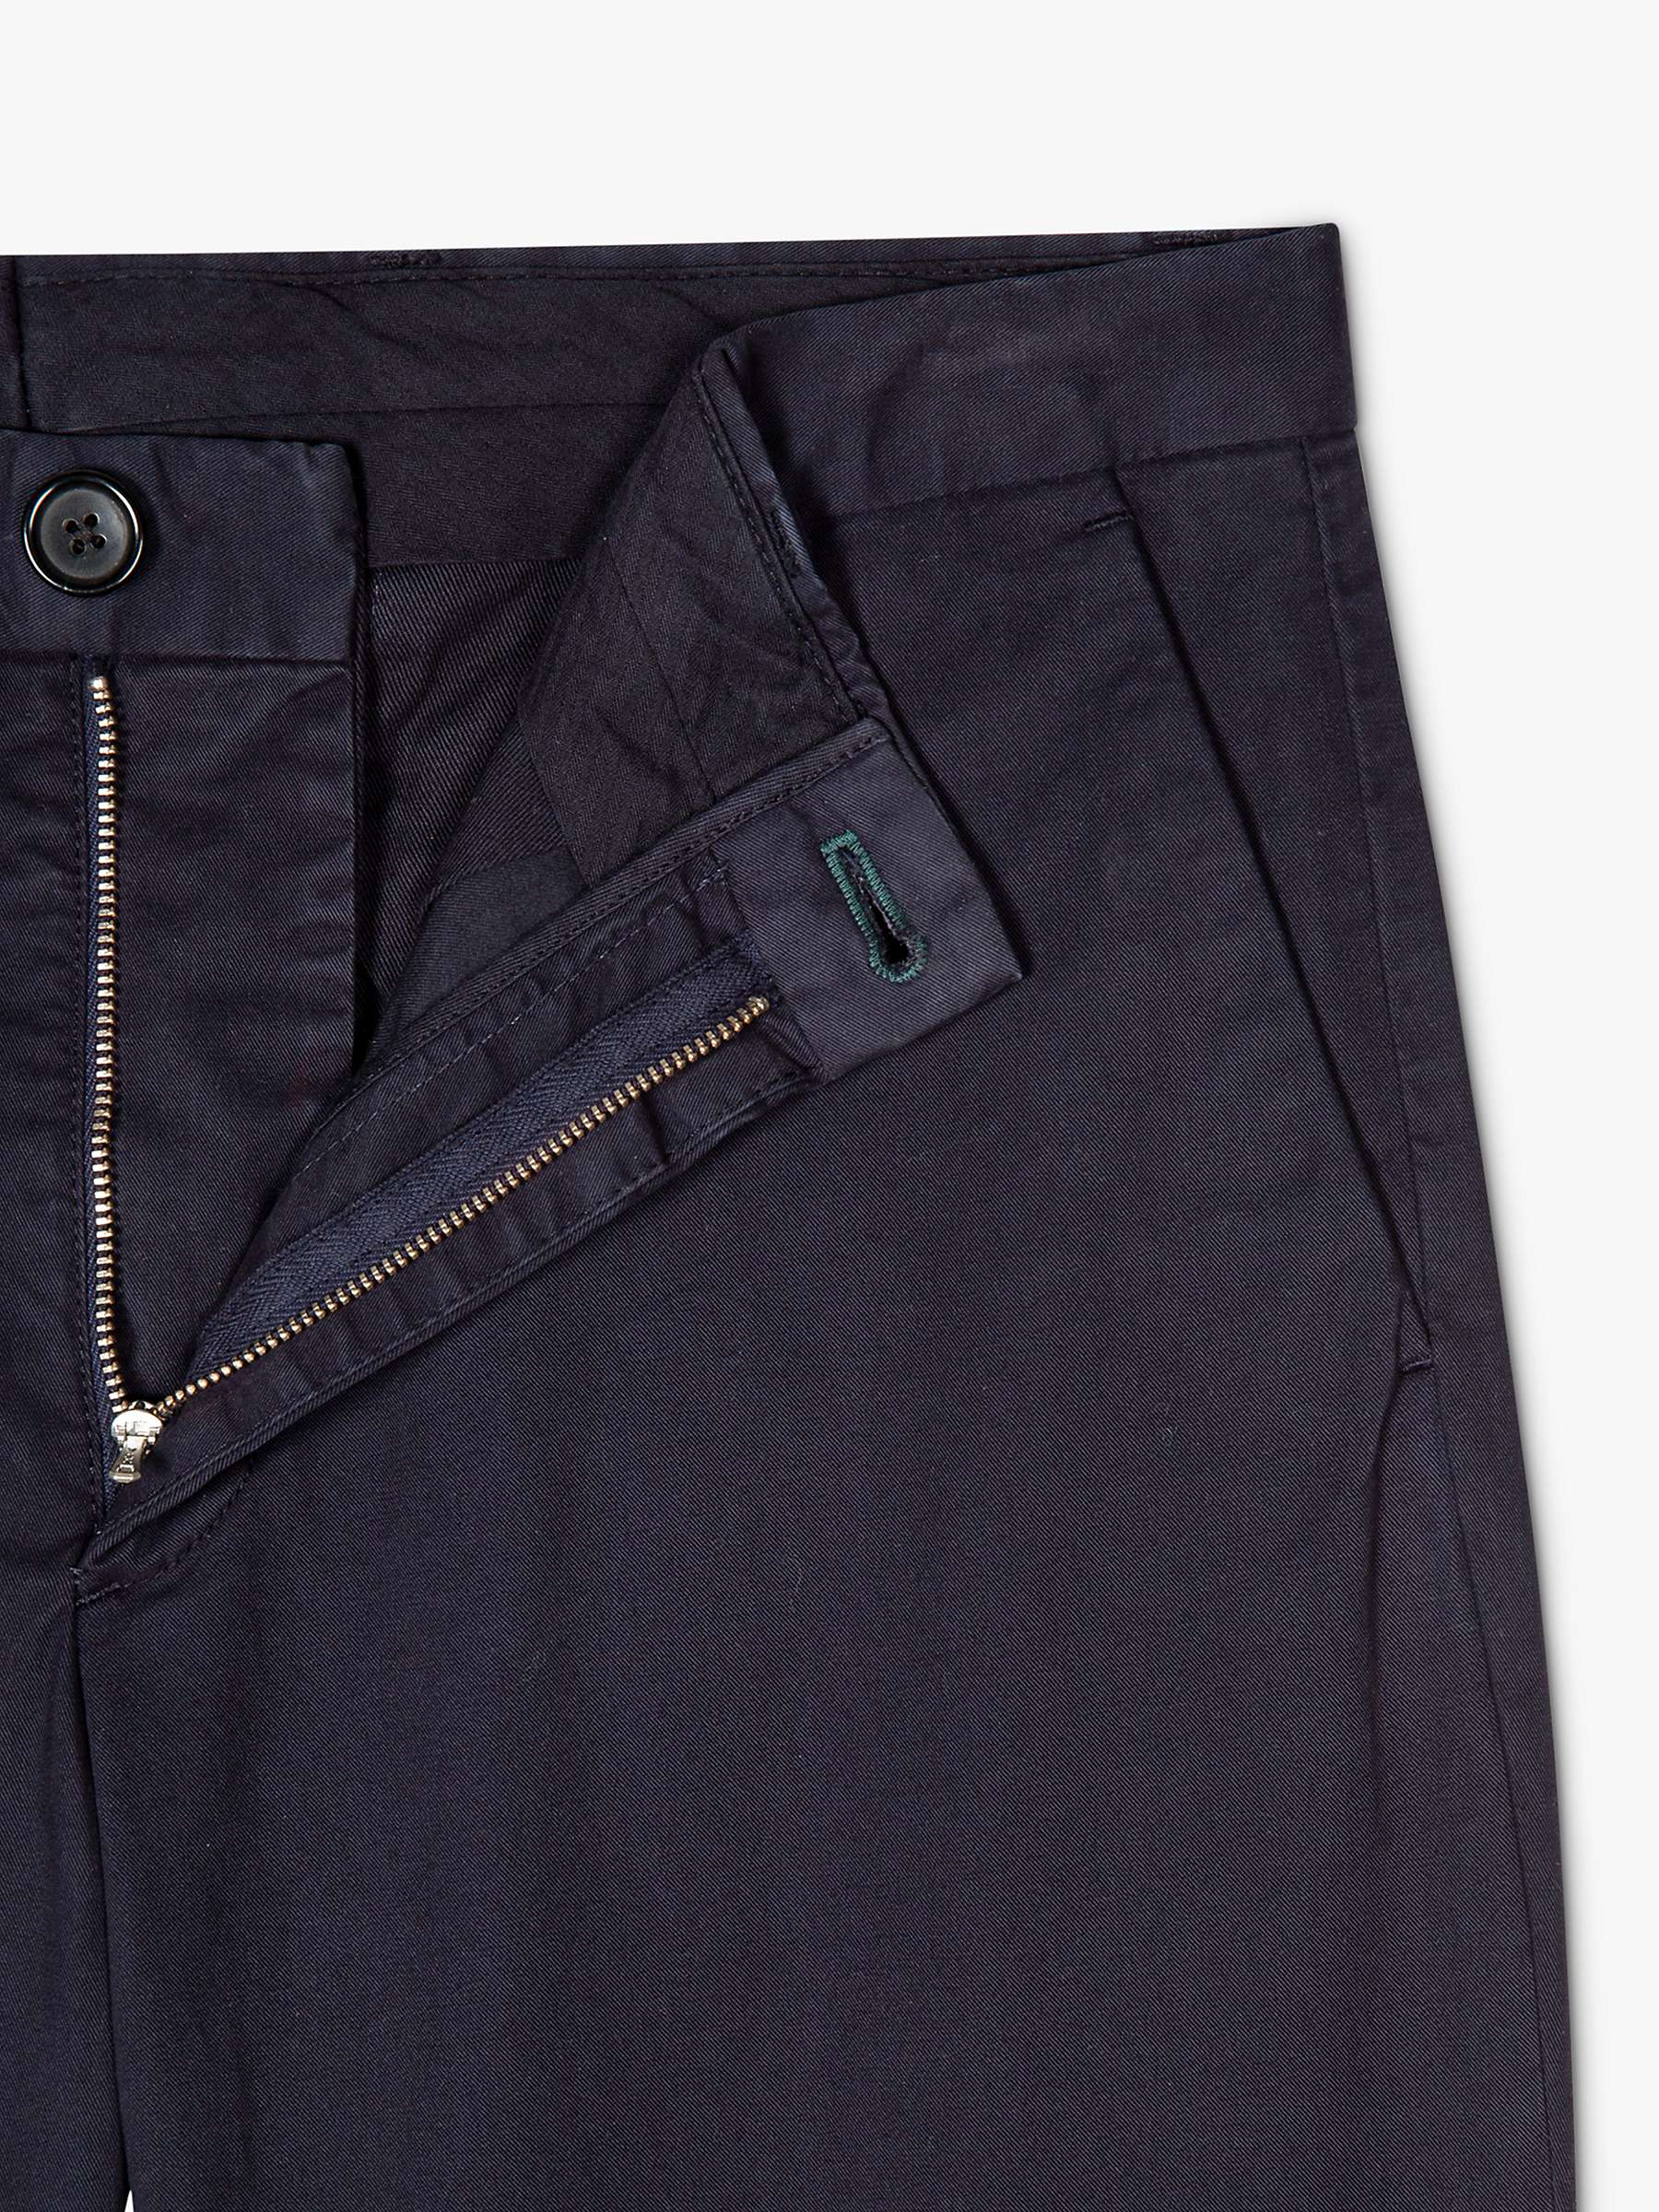 Buy Paul Smith Mid Clean Chinos, Blue Online at johnlewis.com